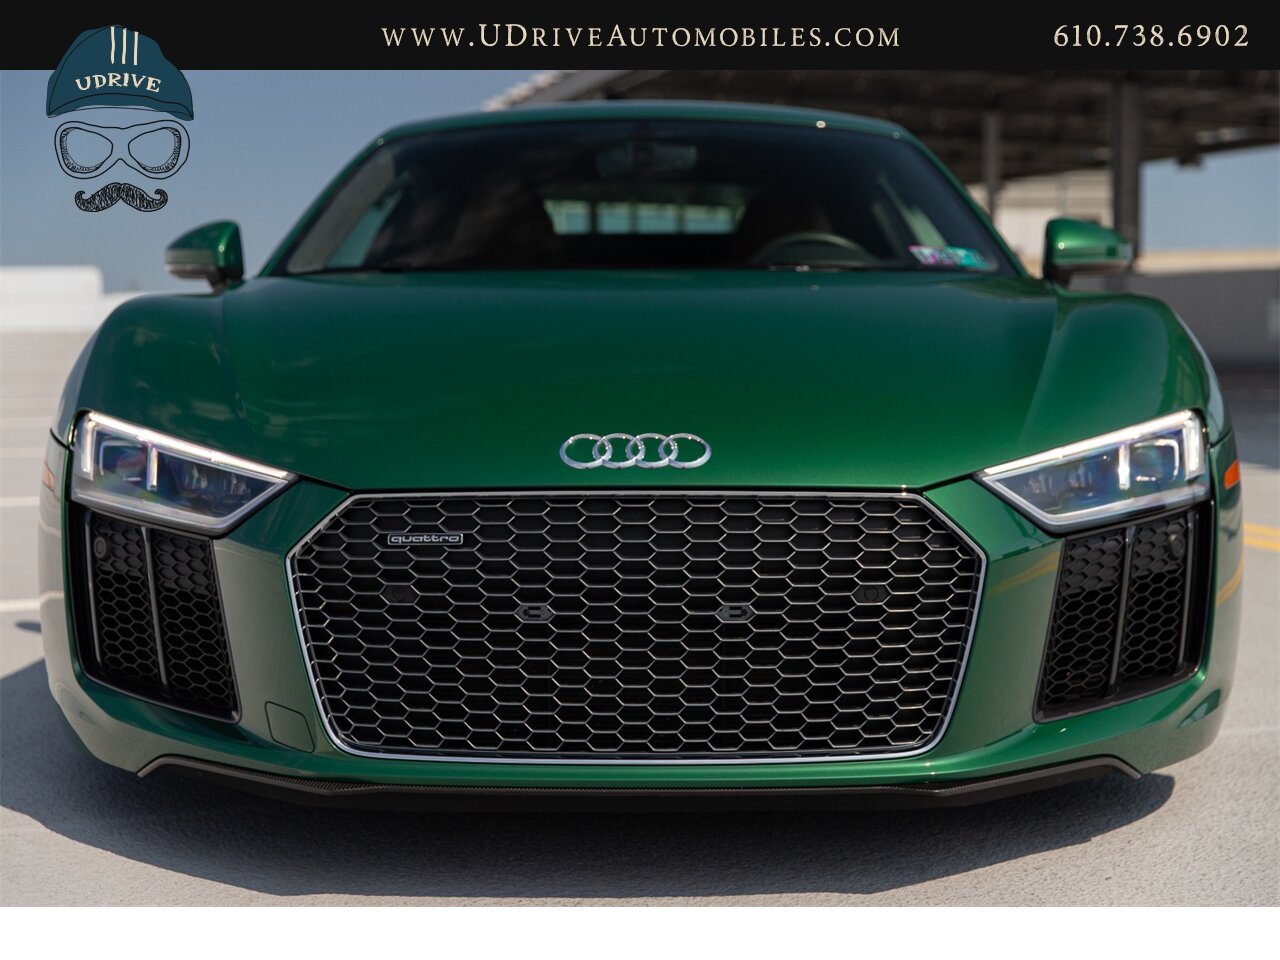 2017 Audi R8 Audi Exclusive Avocado Green Vermont Brown Leather  Diamond Stitching V10 Carbon Fiber - Photo 14 - West Chester, PA 19382